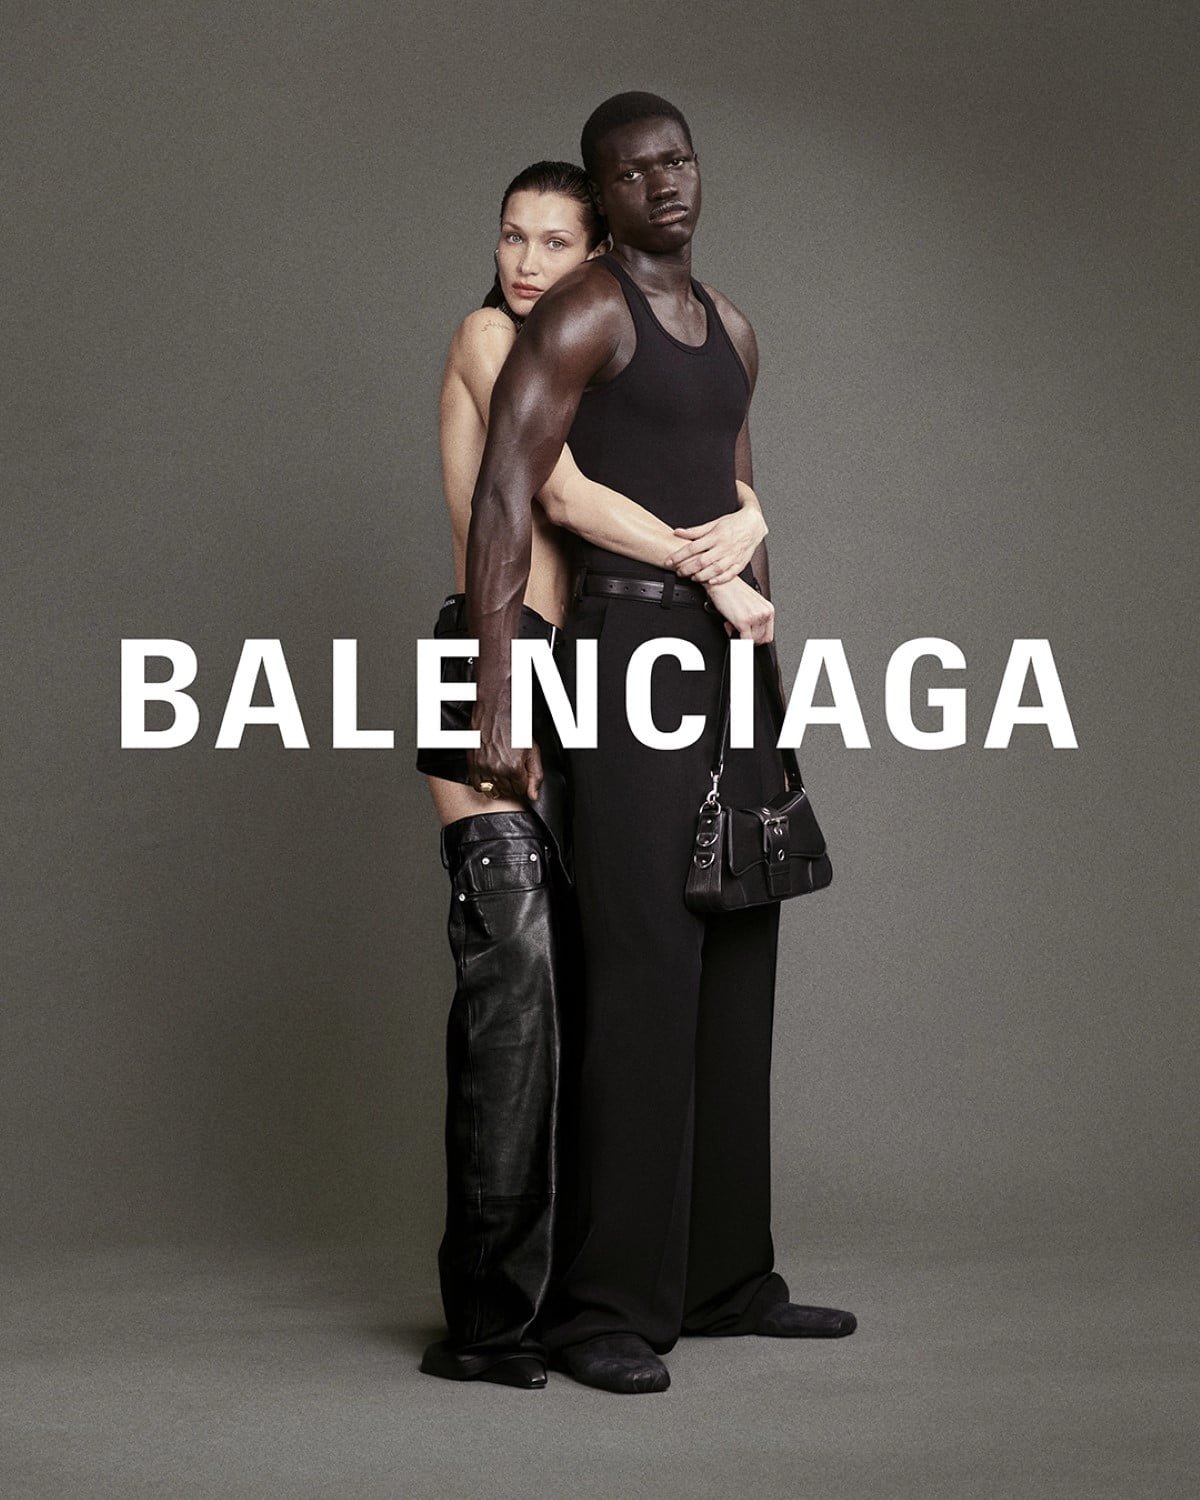 The price of provocation Whats next for Balenciaga  Vogue Business